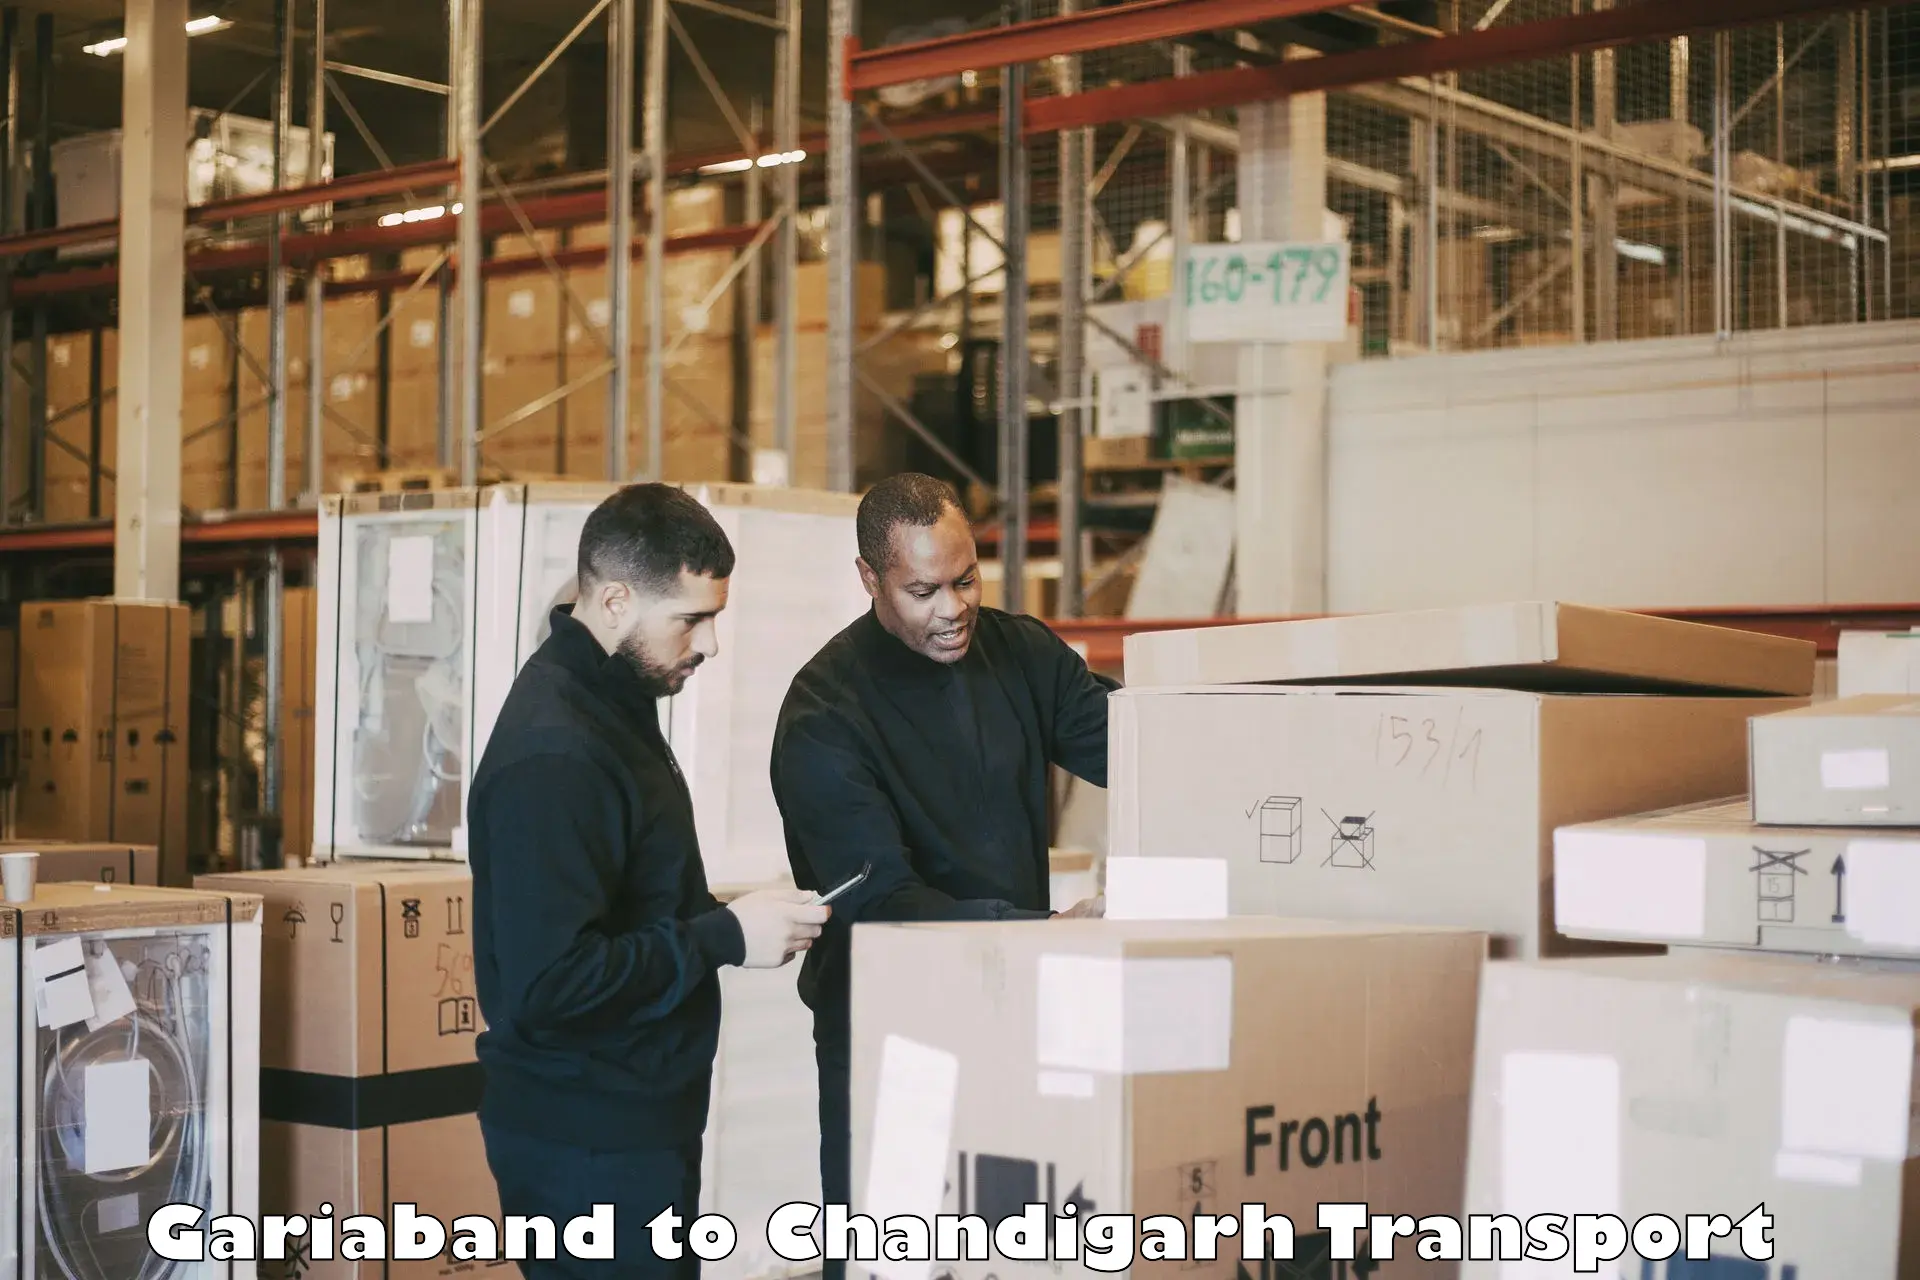 Lorry transport service Gariaband to Chandigarh